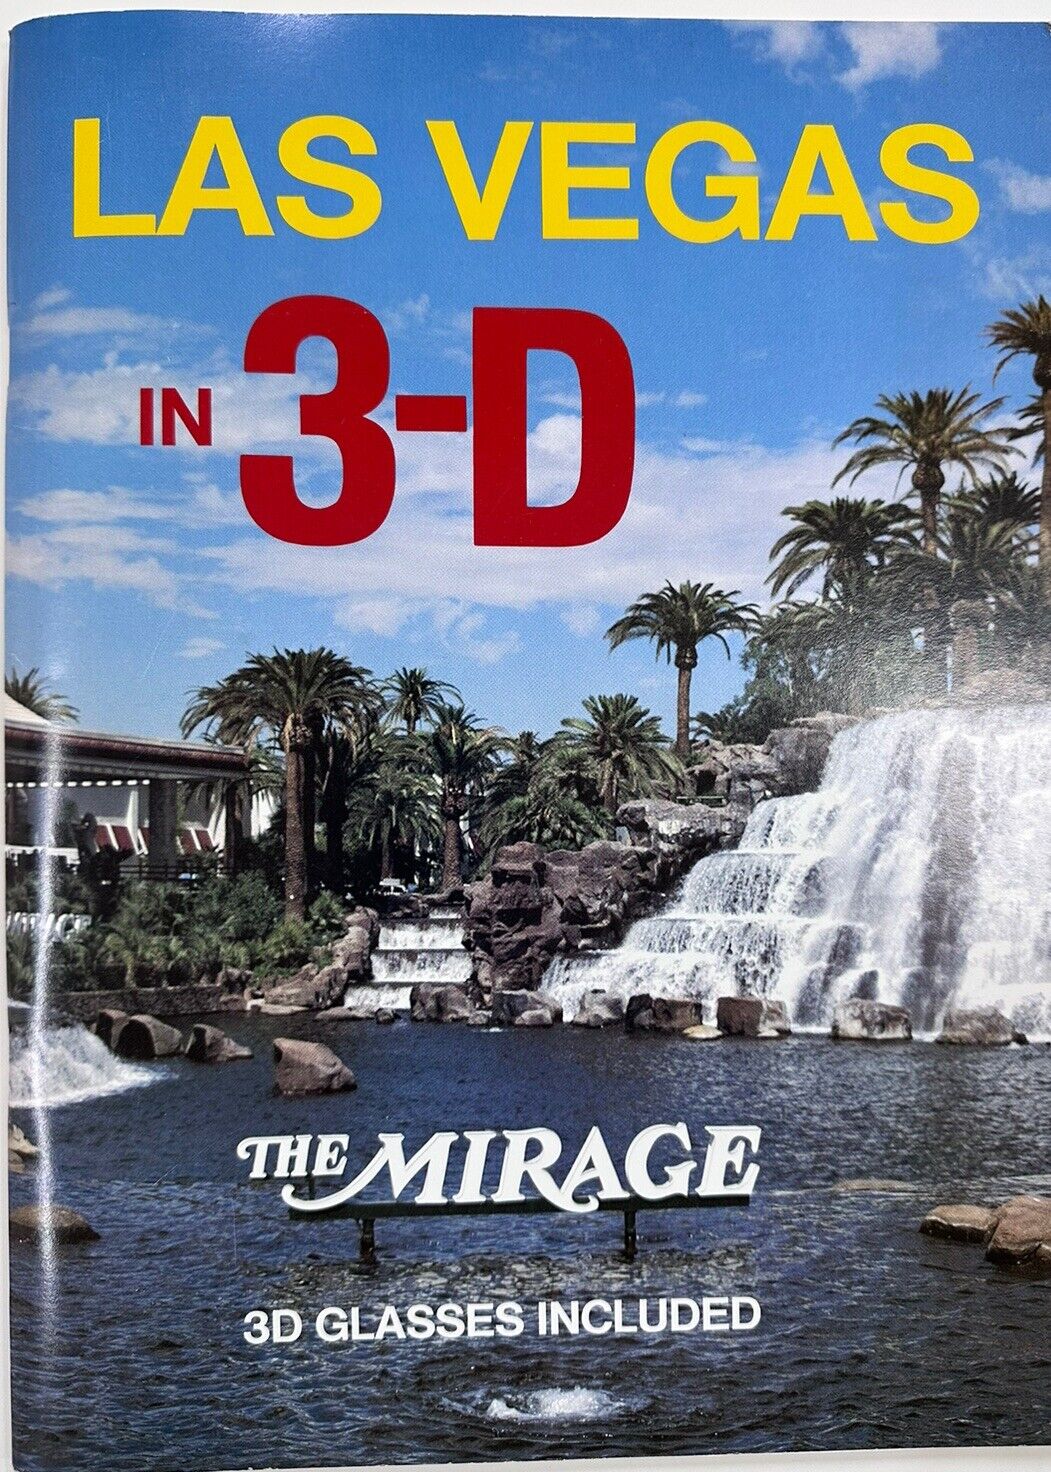 Las Vegas In 3-D The Mirage 3D Glasses  By Owen Phairis First Ed 